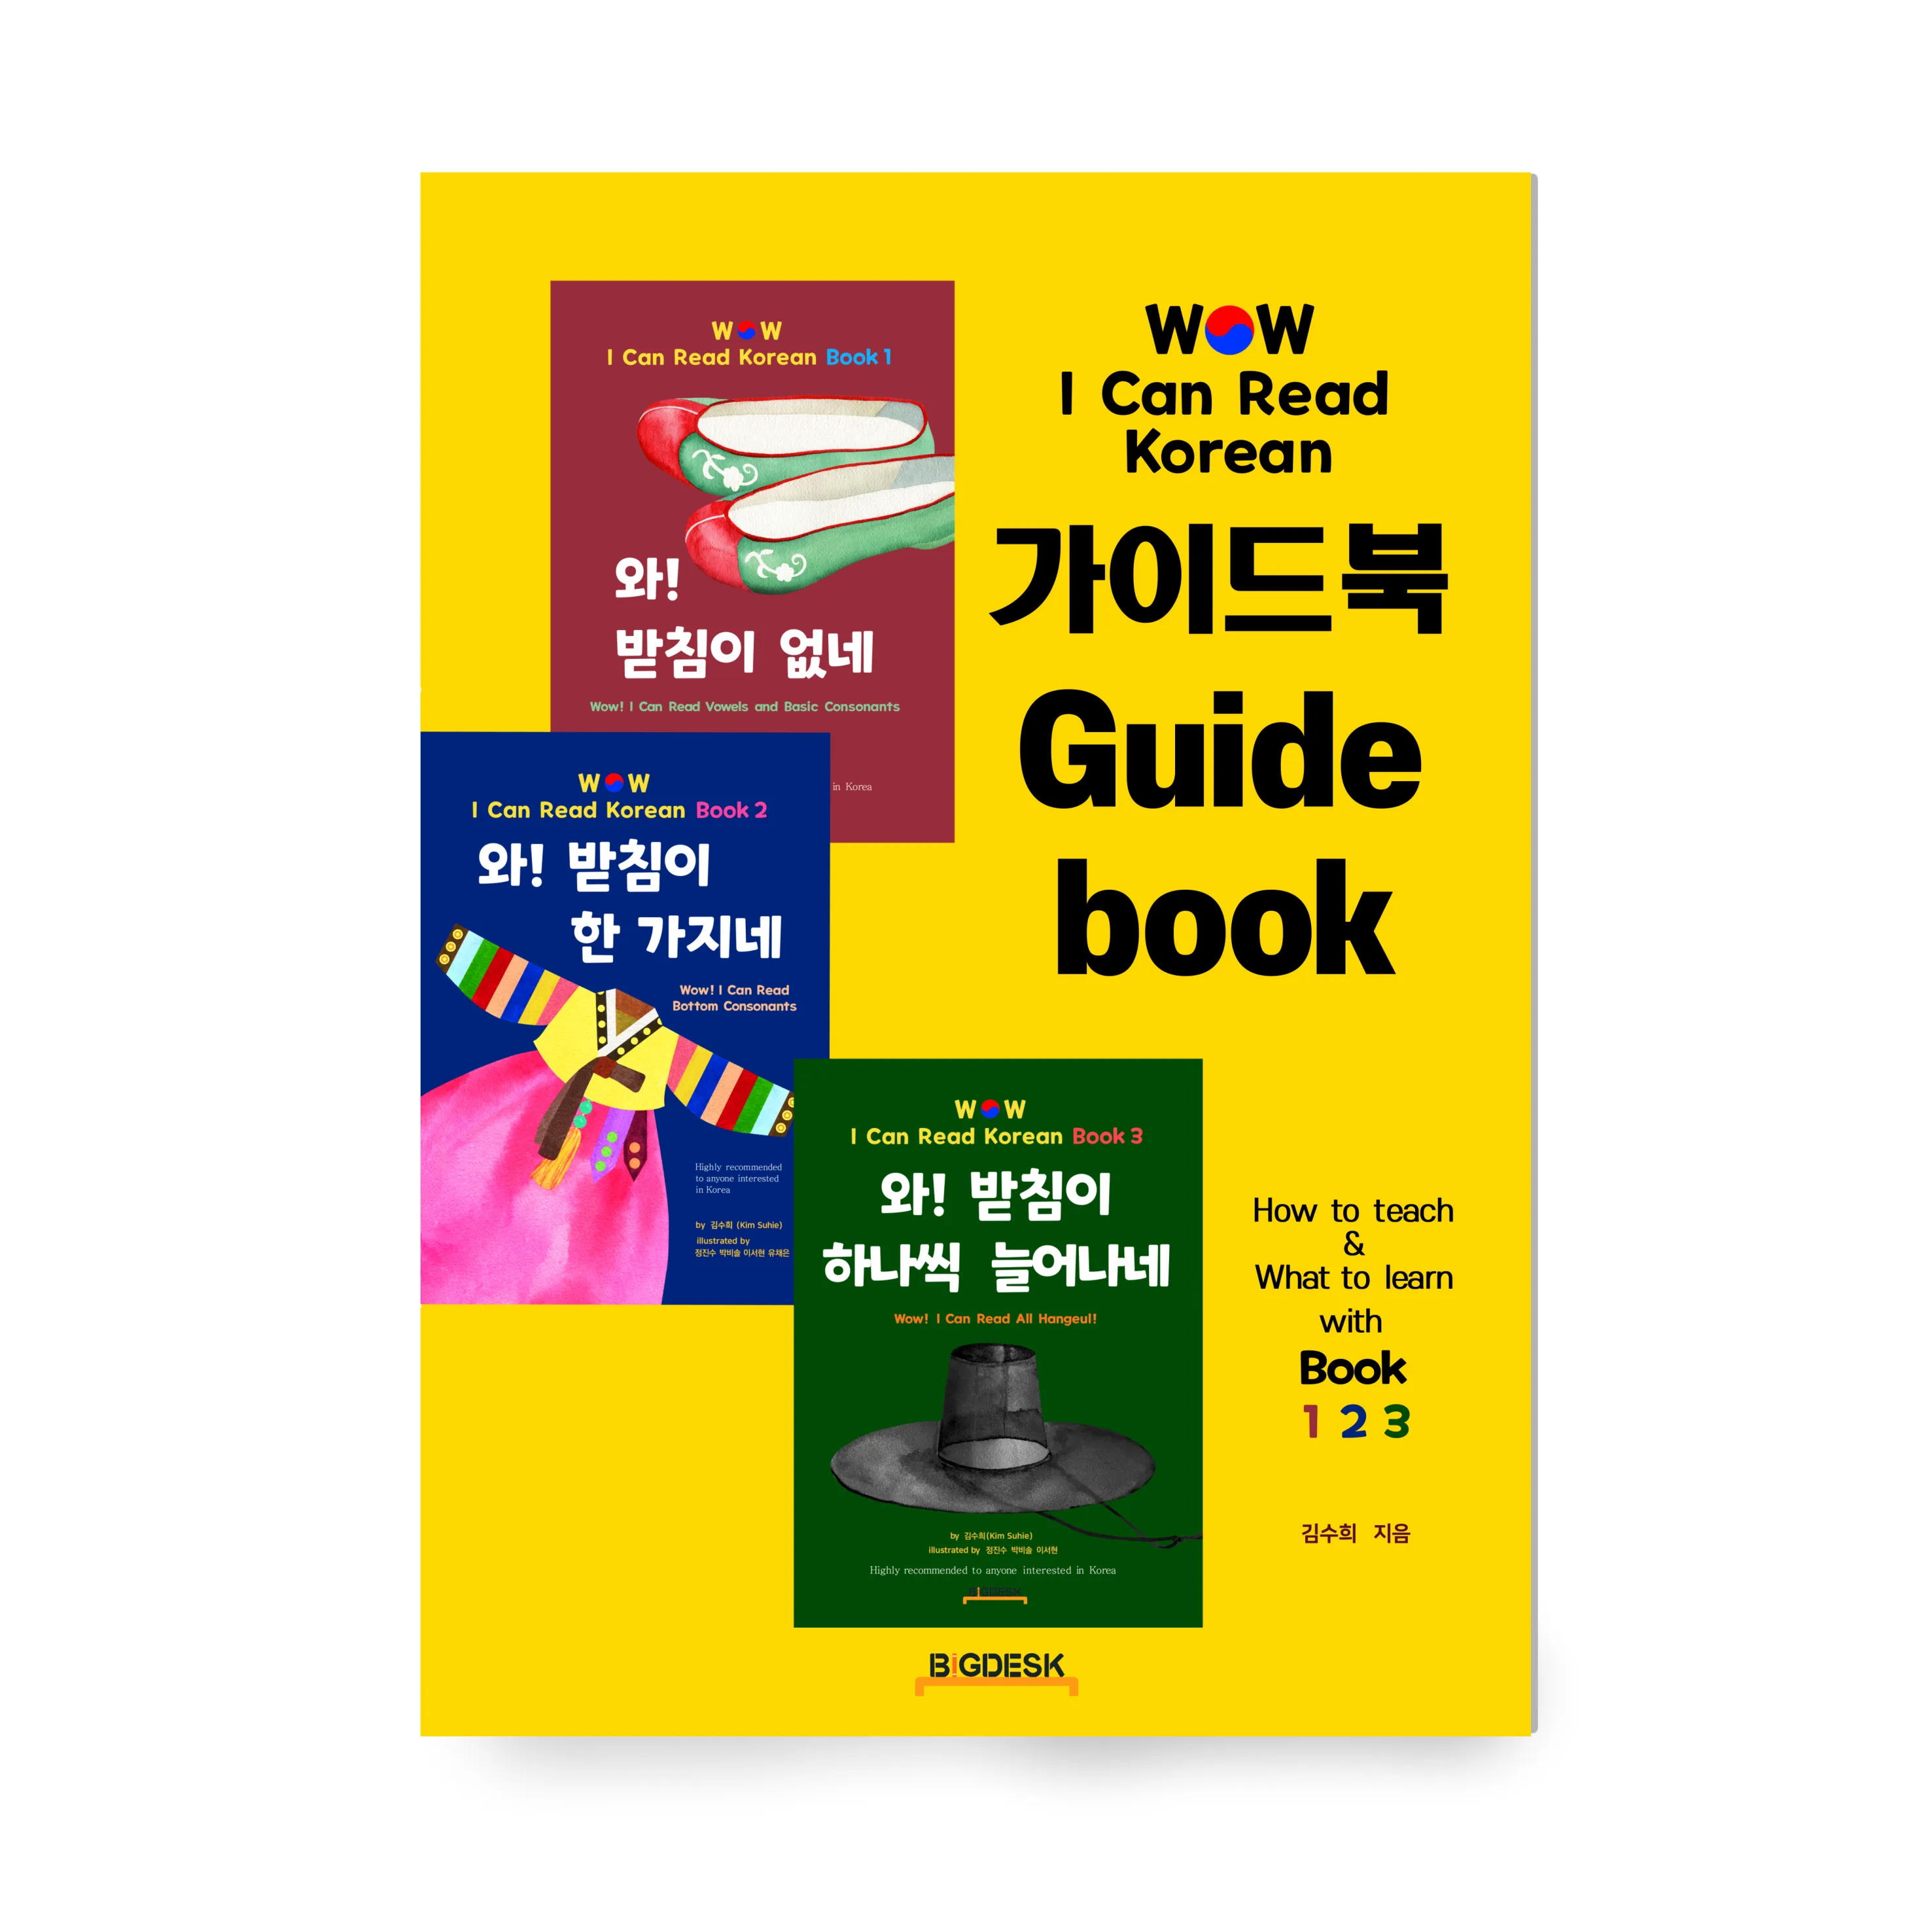 (BIGDESK) Korean English guidebook full of rich vocabulary and smart grammar for Korean learners all around the world KOTRA